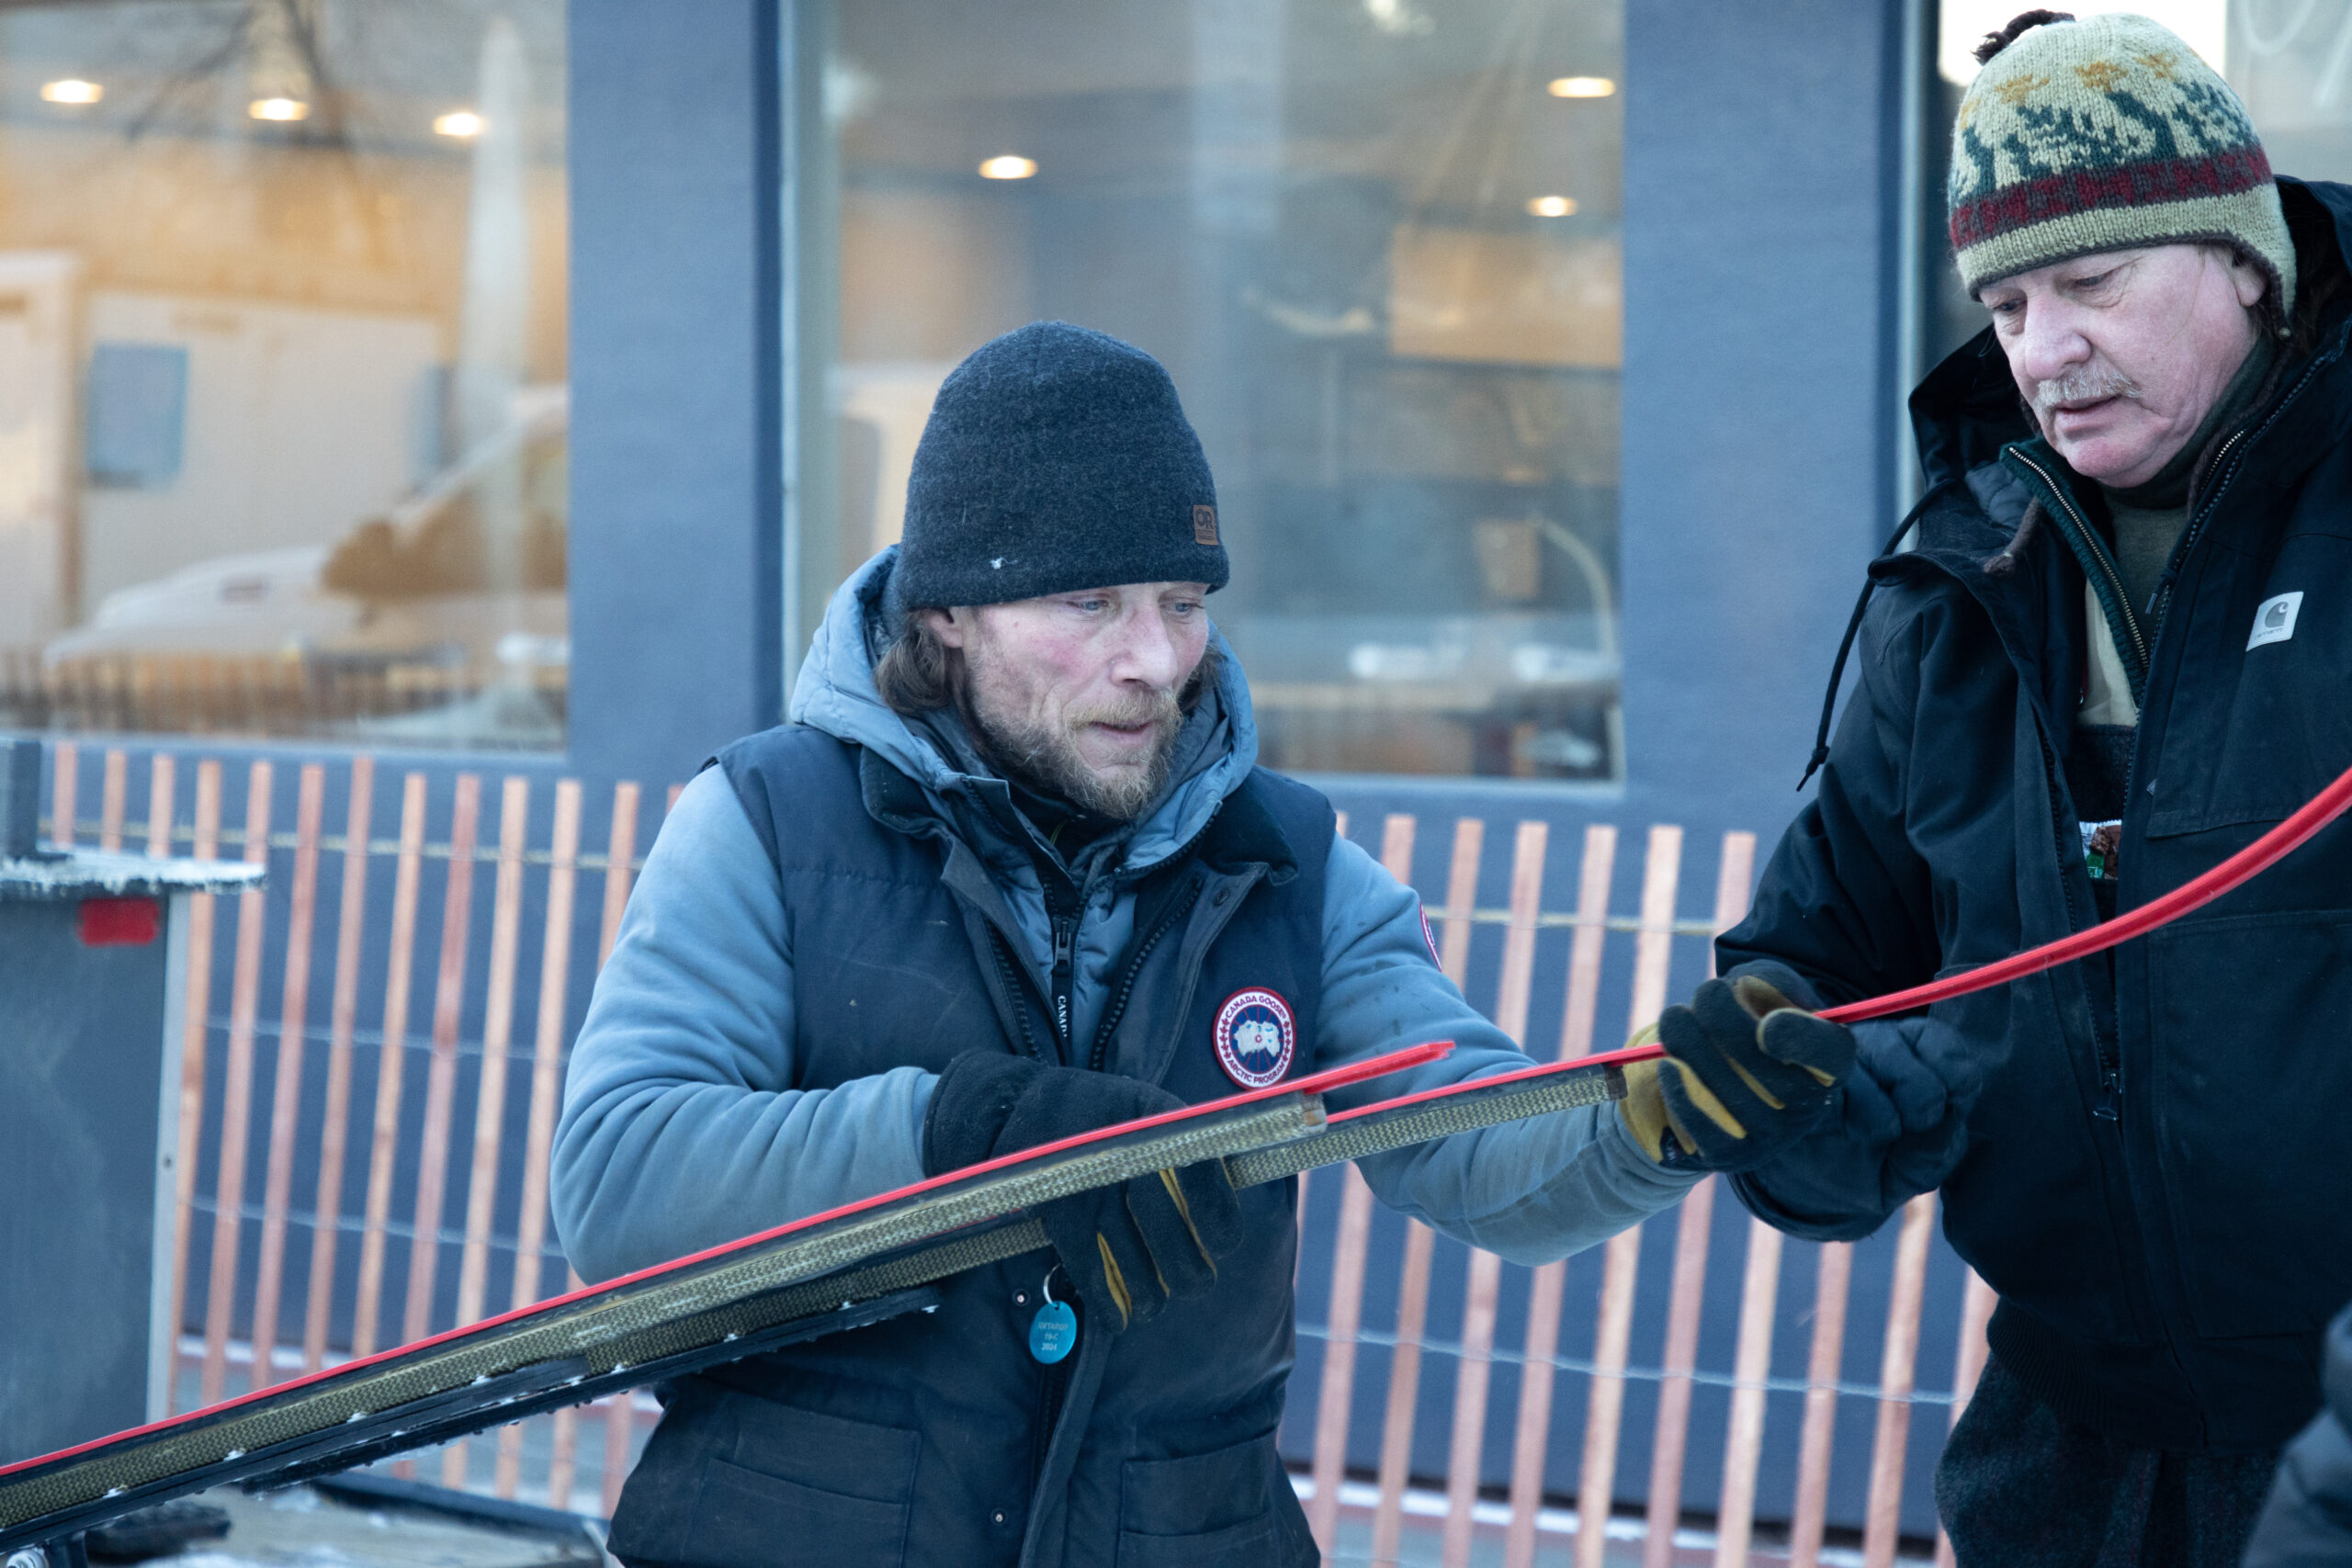 A man dressed in winter gear with a dark vest and gloves works on preparing a sled that will be used for racing.